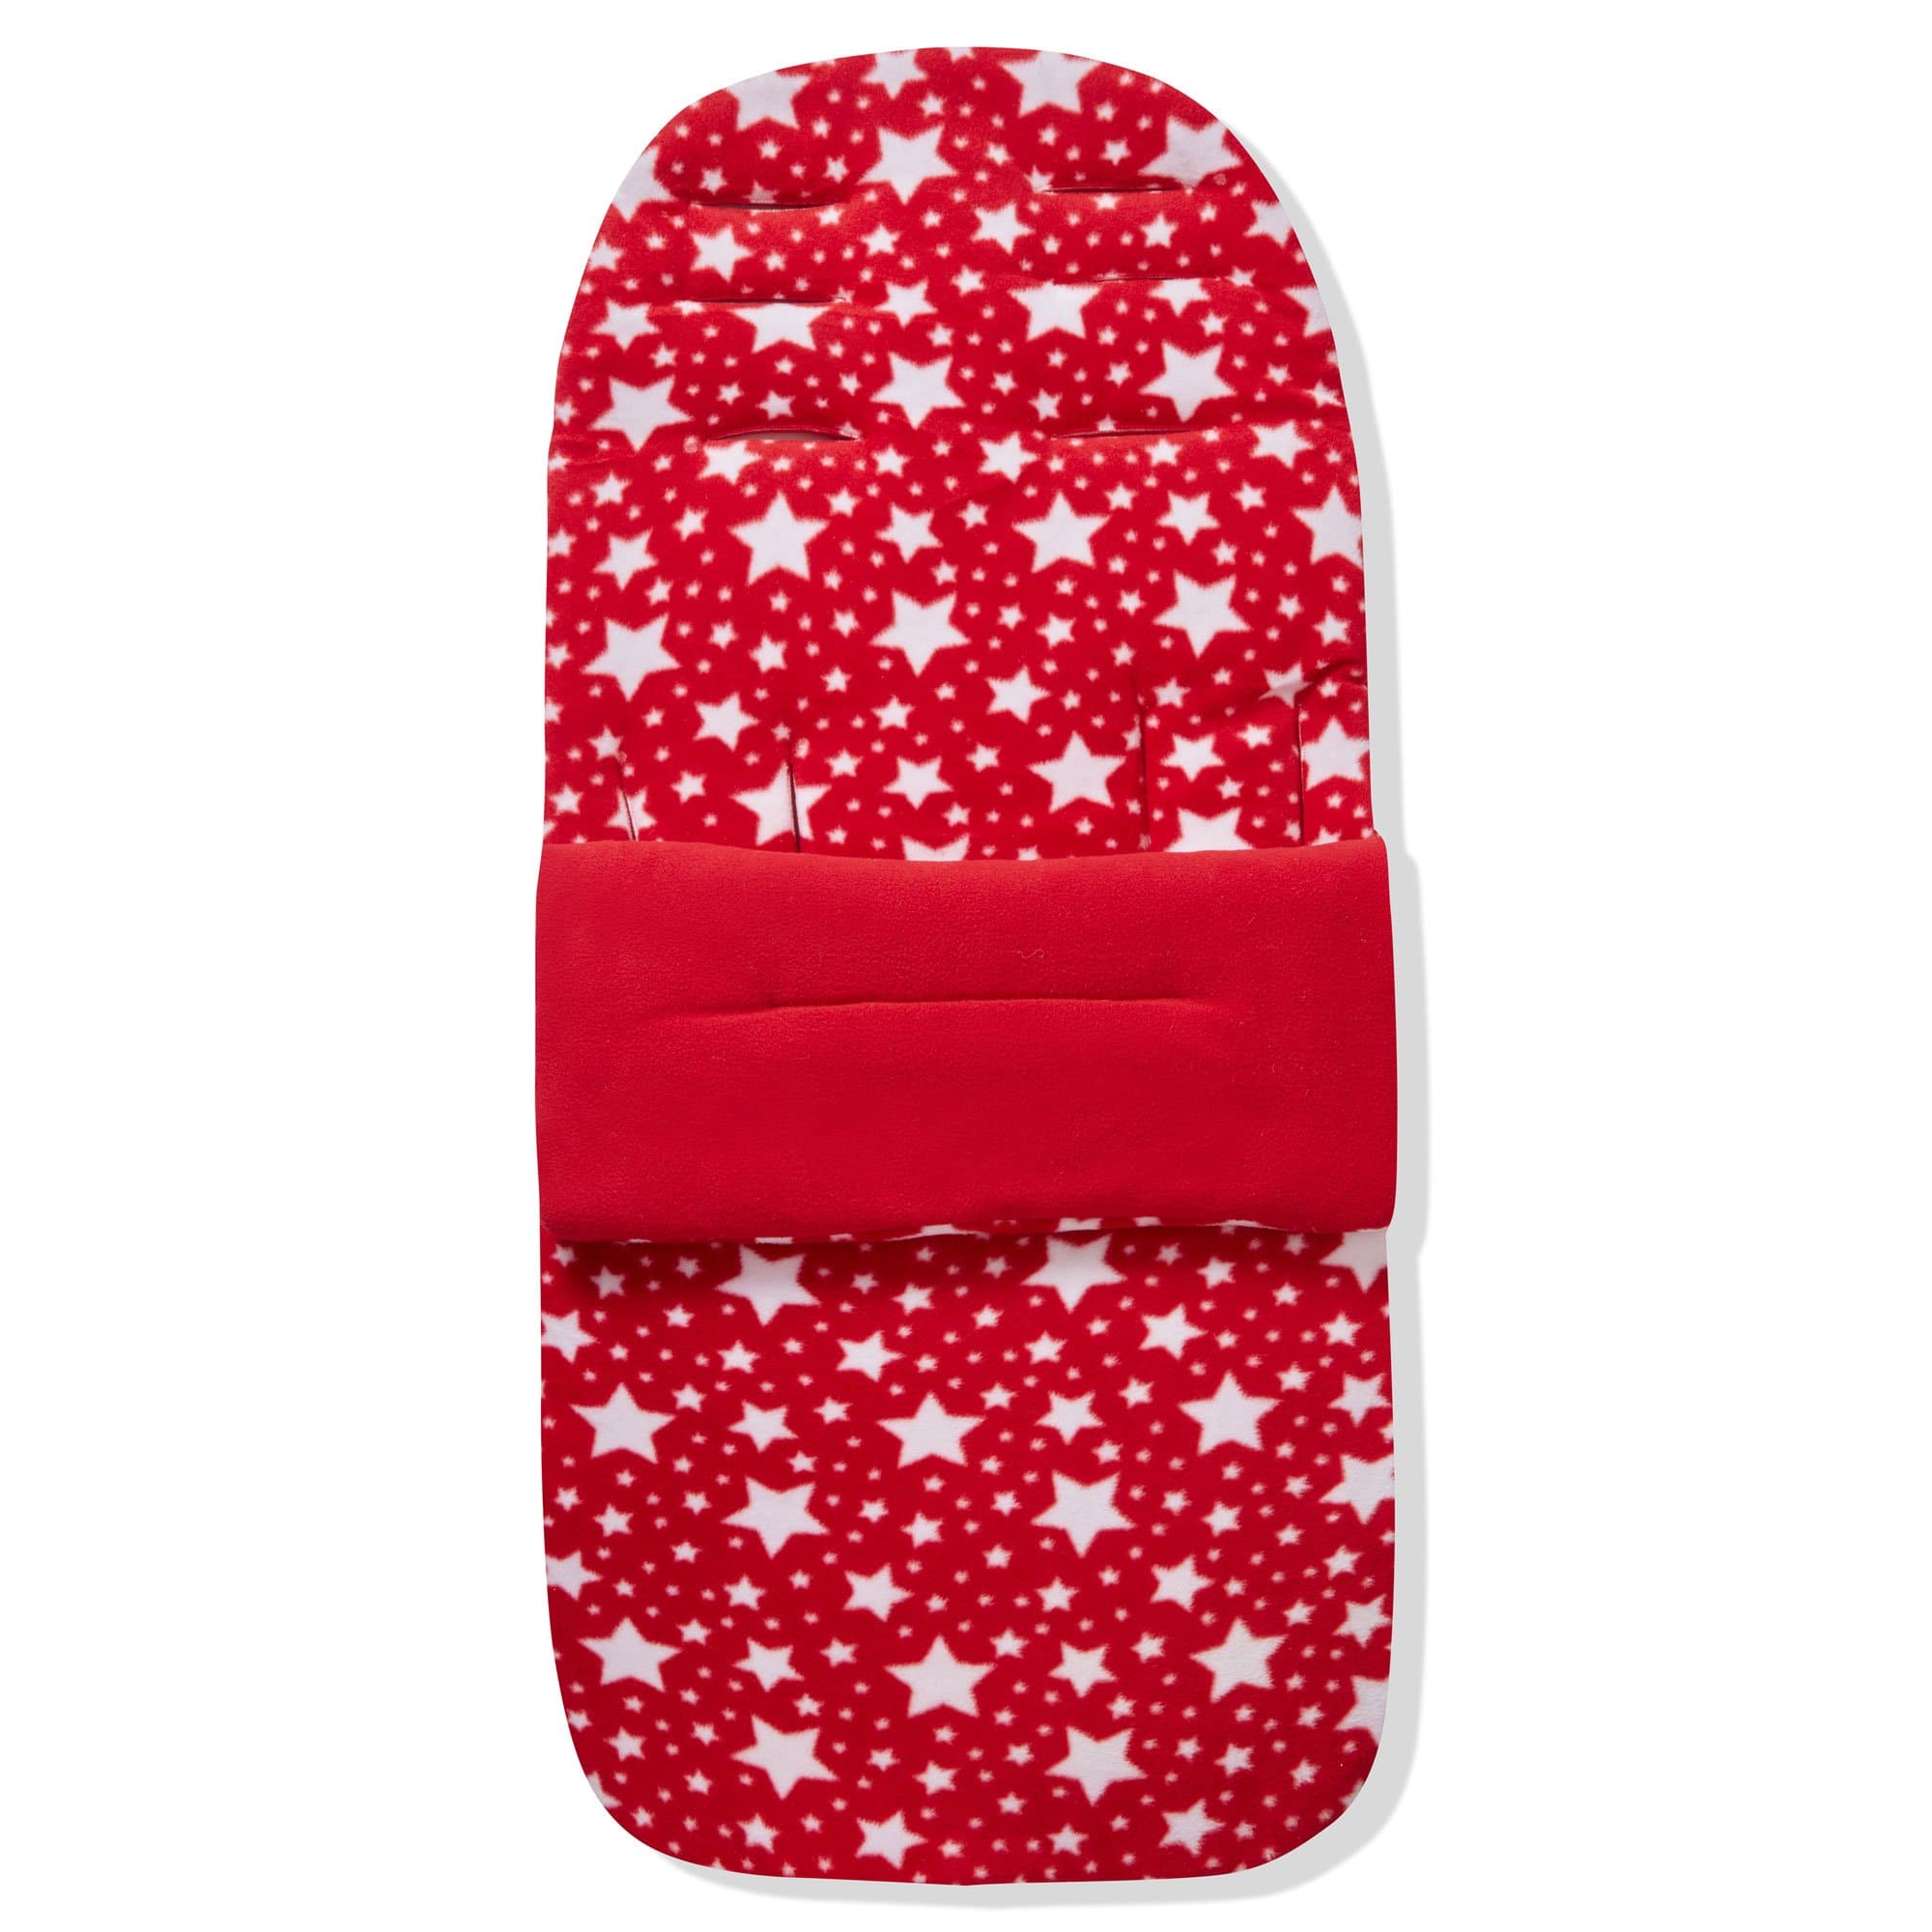 Fleece Footmuff / Cosy Toes Compatible with iCandy - Red Star / Fits All Models | For Your Little One